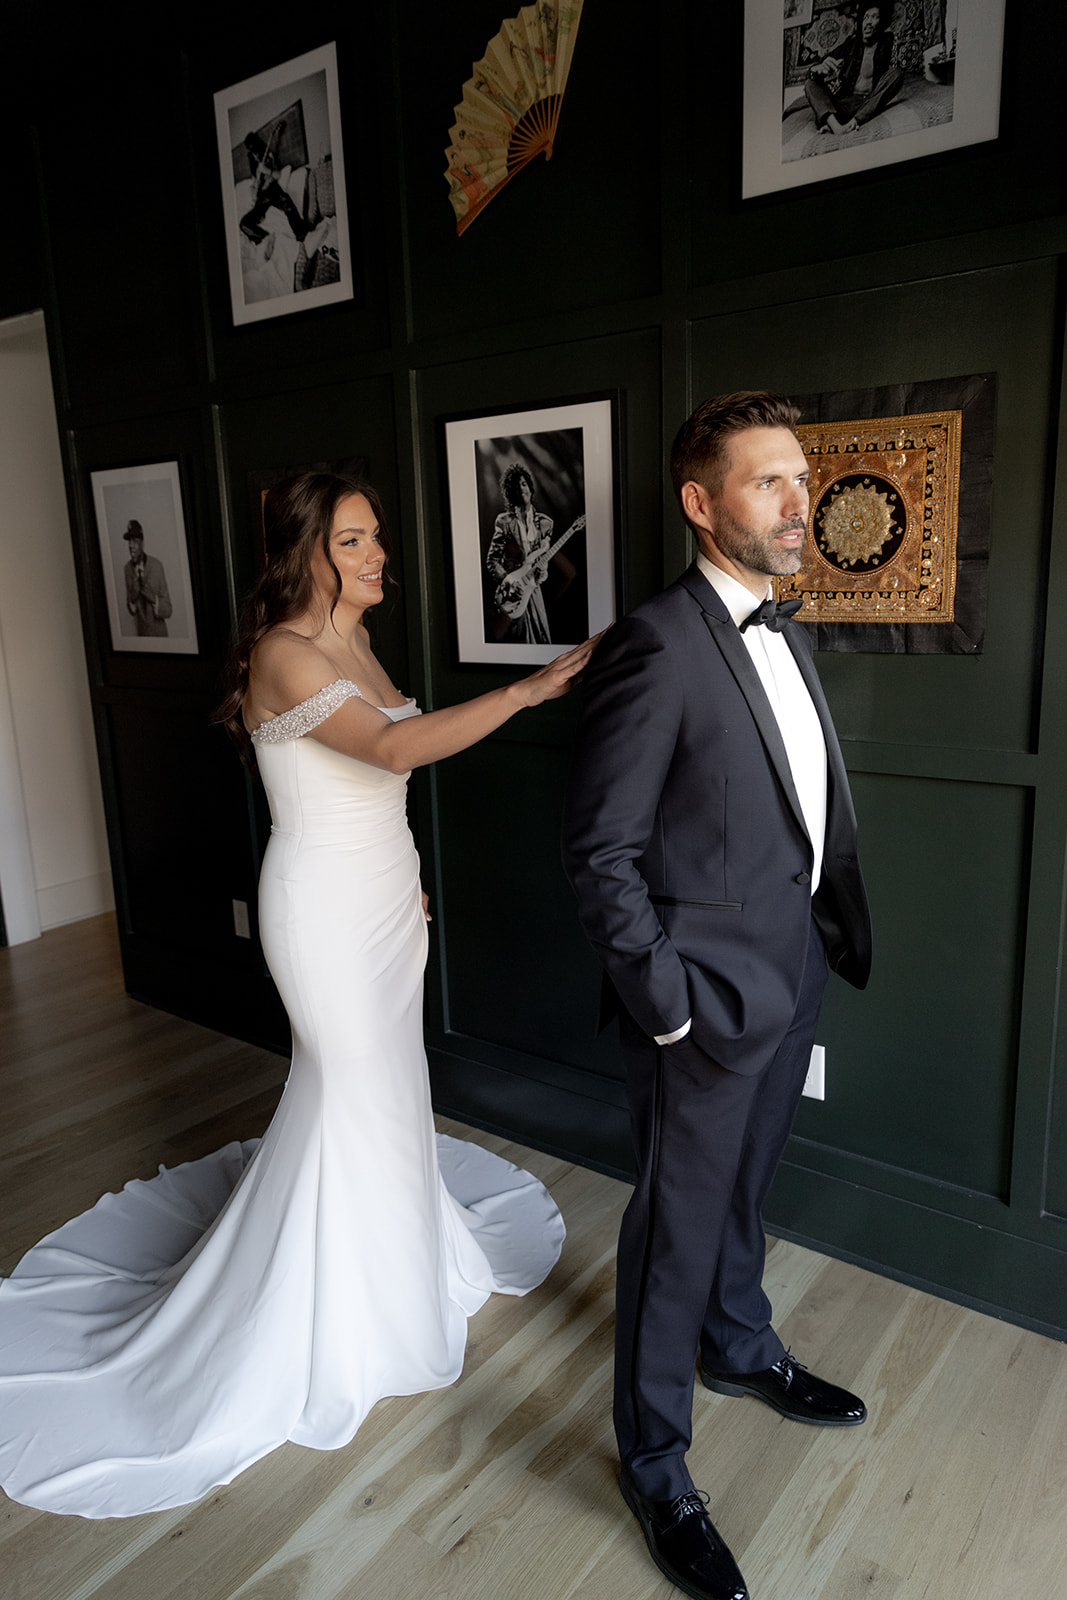 First look between bride and groom at Charleston Elopement in front of picture wall